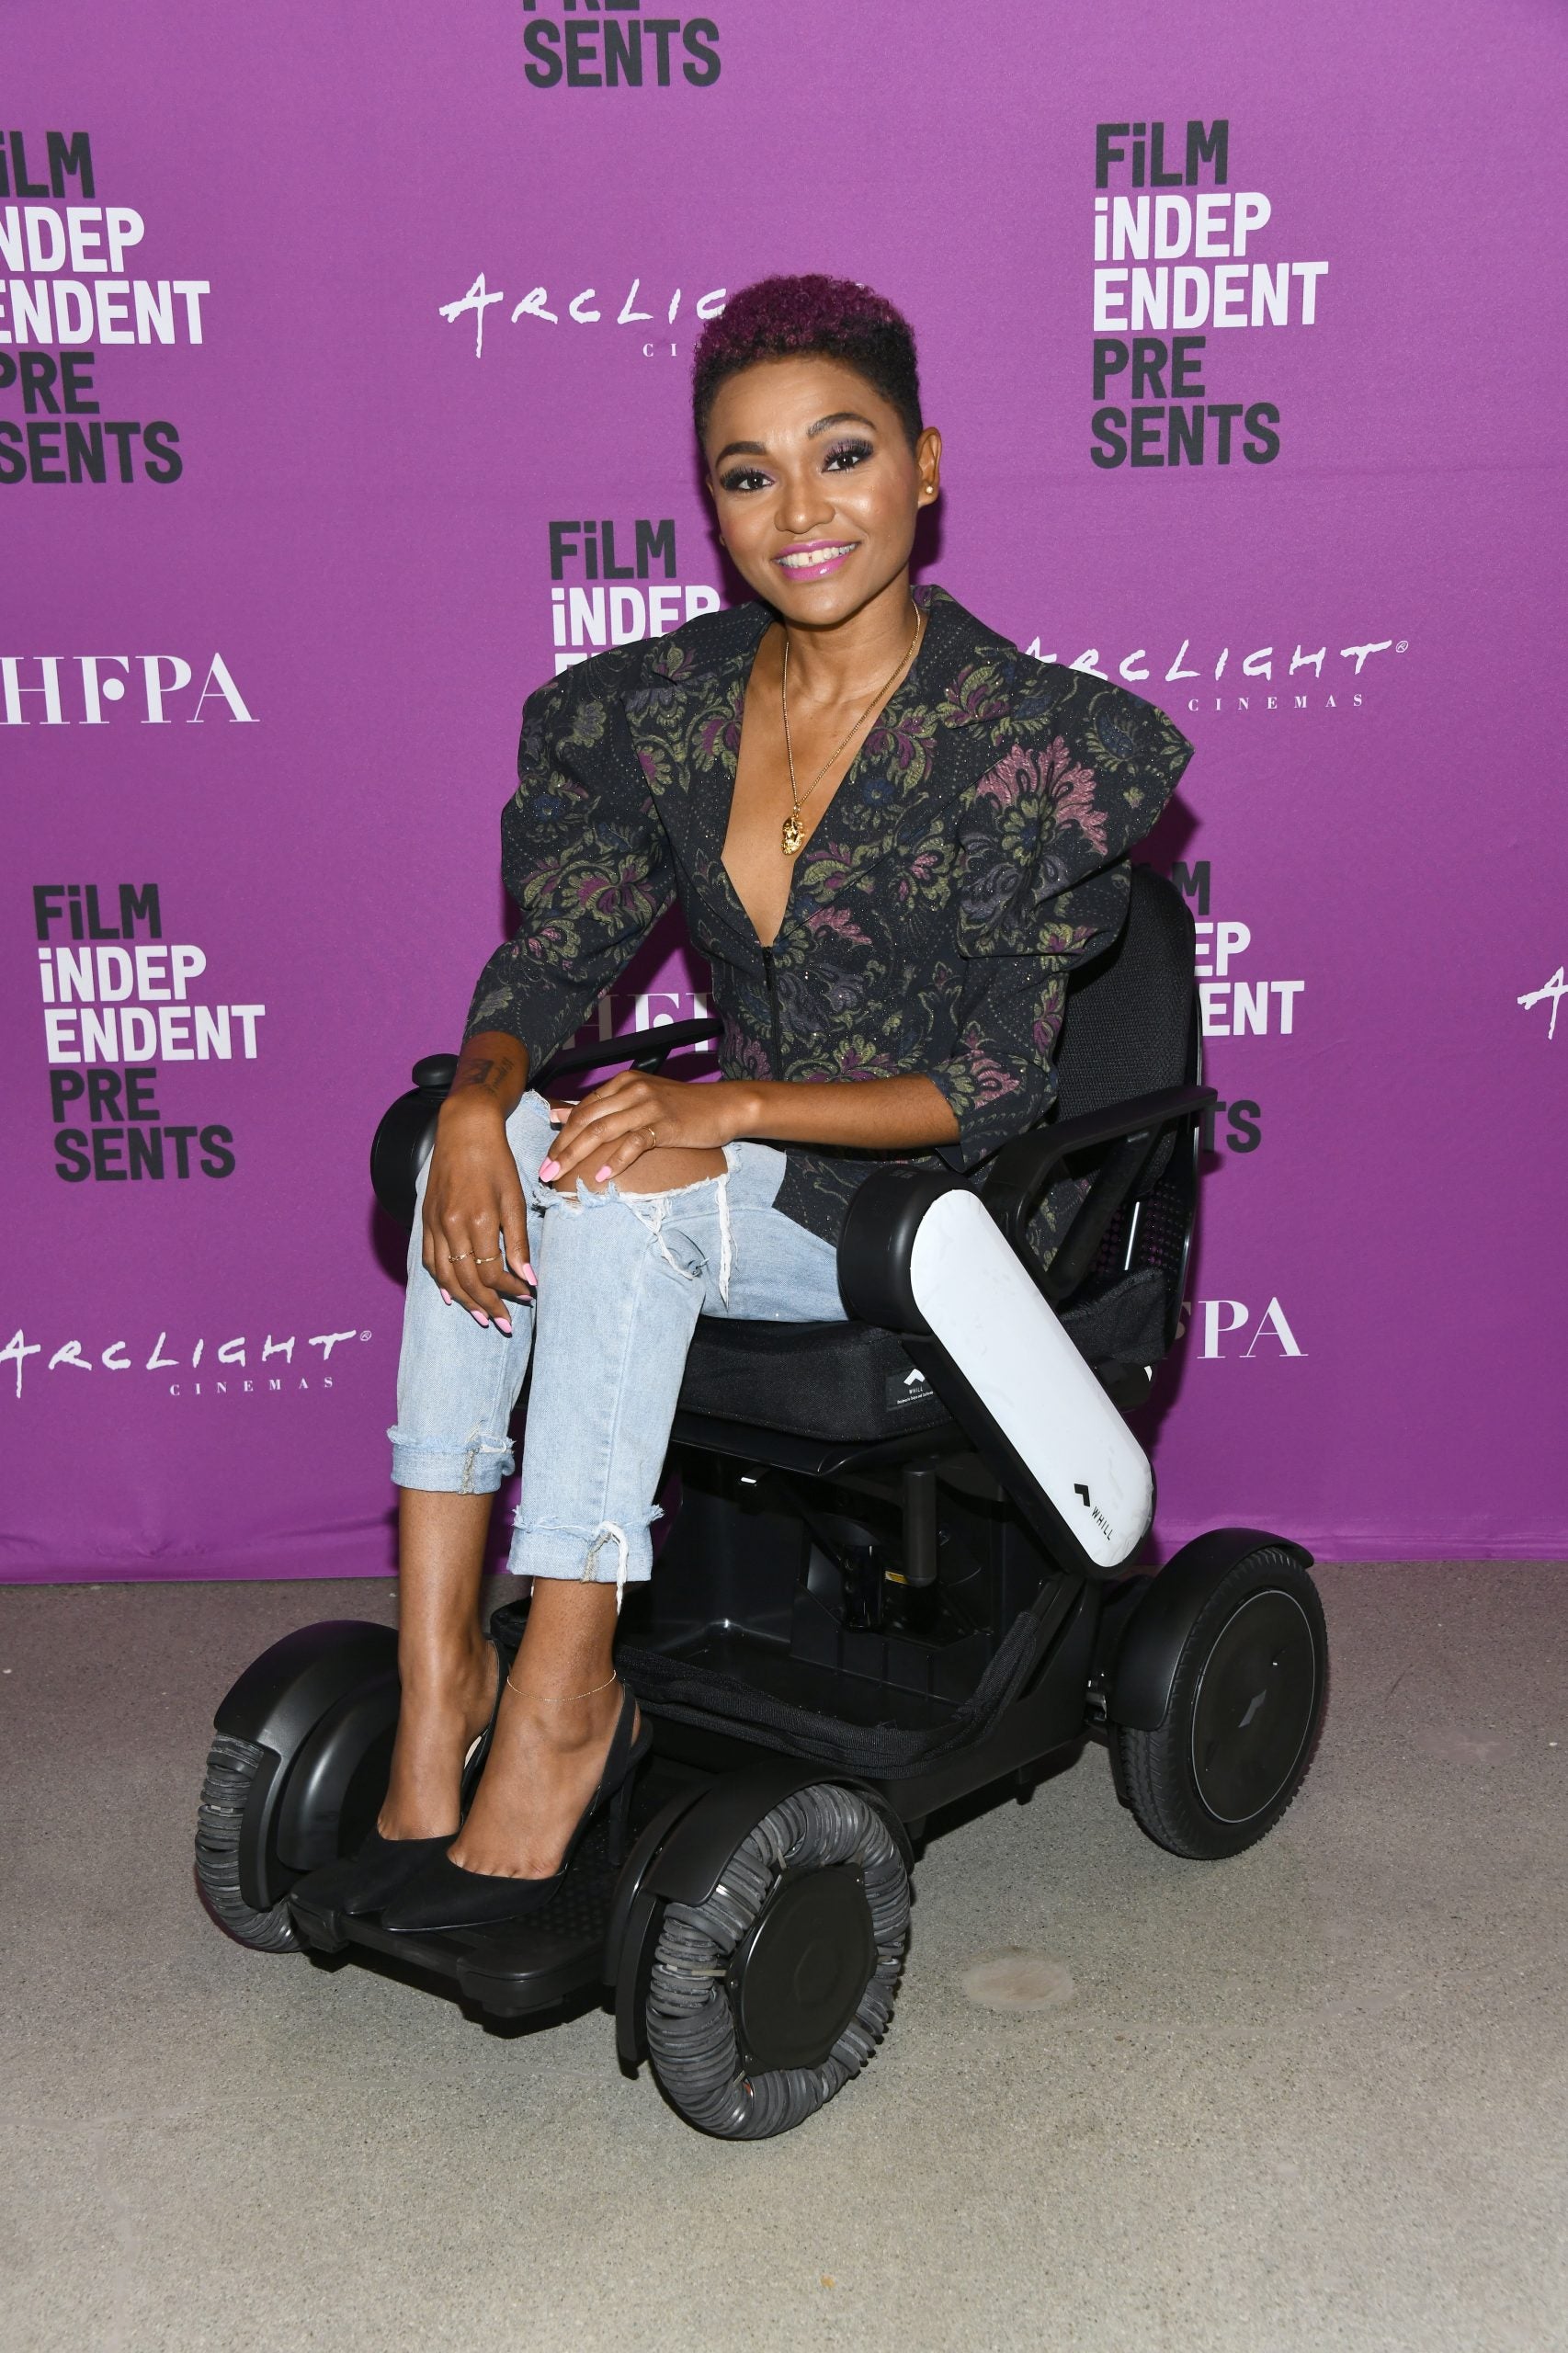 Lauren “Lolo” Spencer Wants To Tell Love Stories Centering Black Disabled Bodies